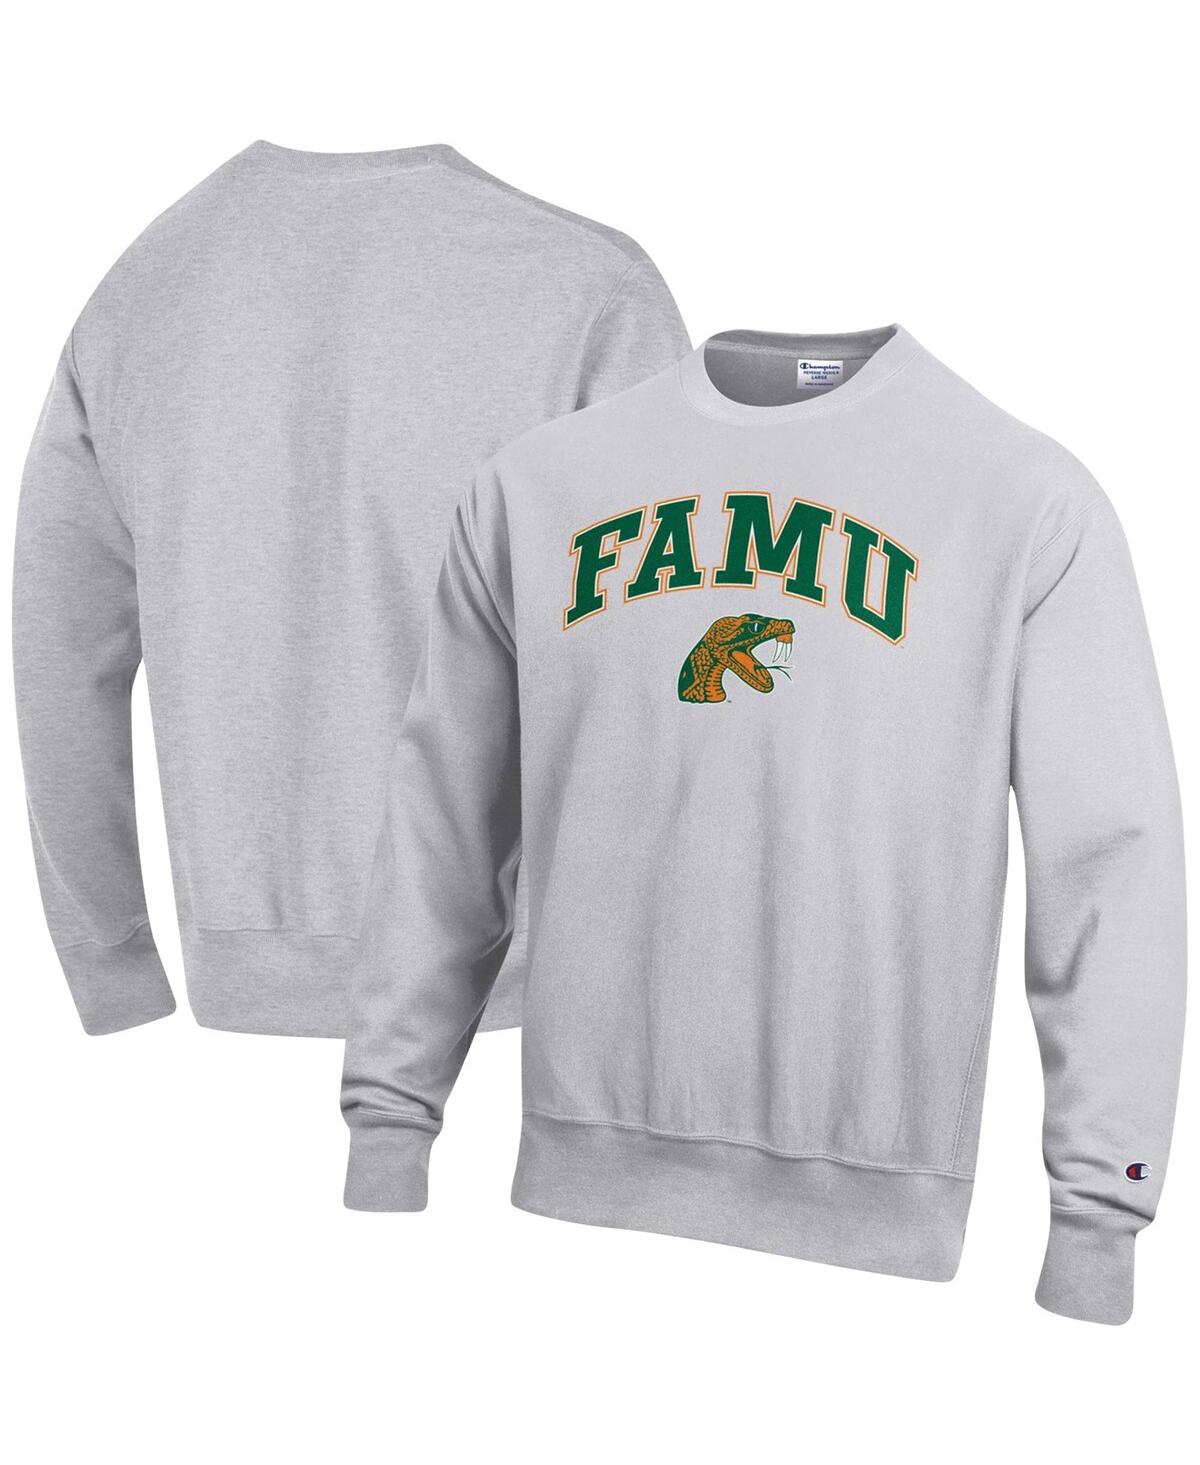 CHAMPION MEN'S CHAMPION HEATHERED GRAY FLORIDA A&M RATTLERS ARCH OVER LOGO REVERSE WEAVE PULLOVER SWEATSHIRT